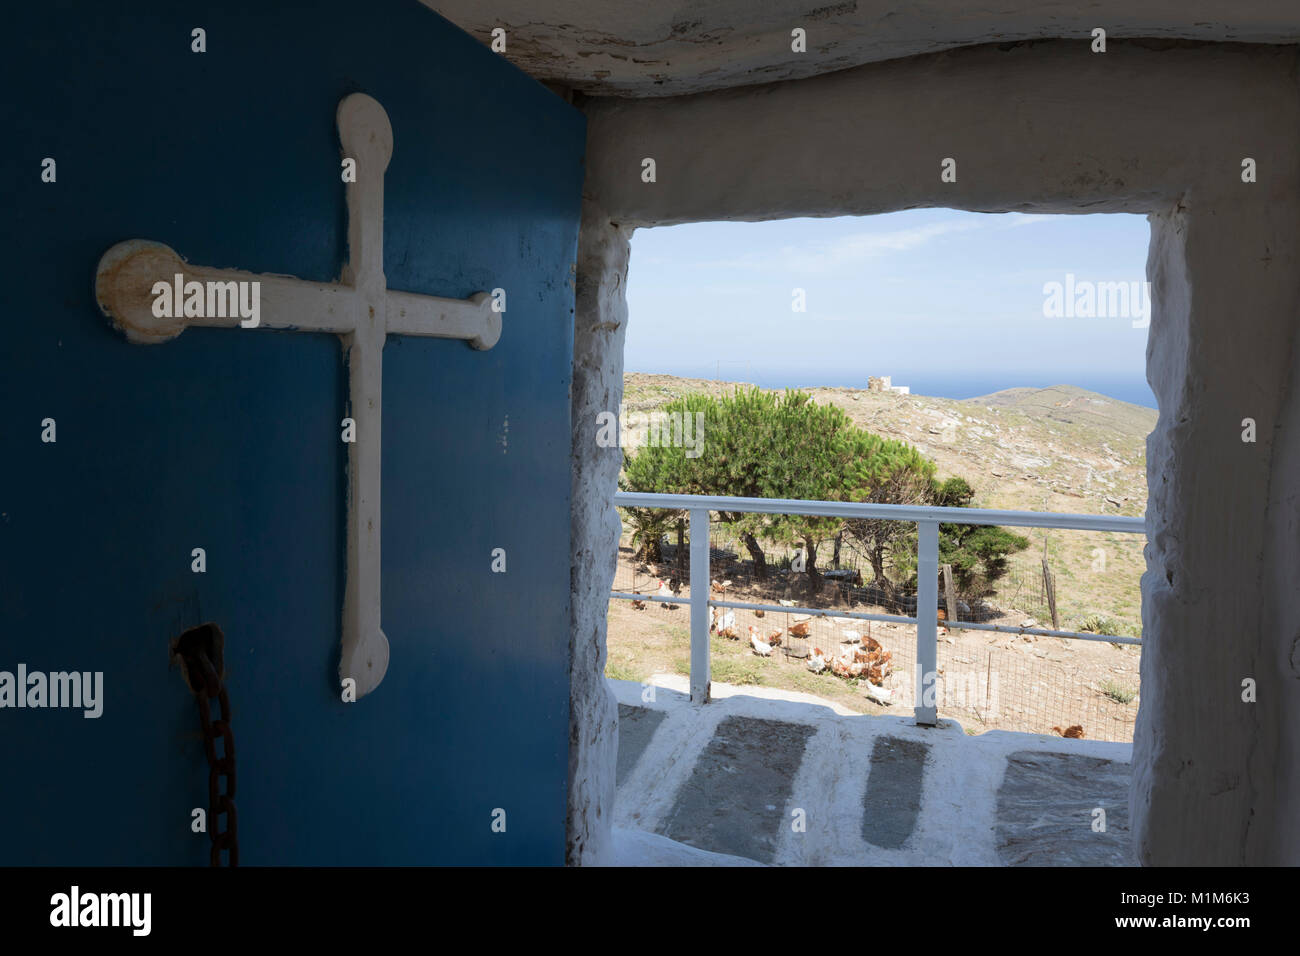 View through door of Moni Taxiarchon Monastery in north east of island, Serifos, Cyclades, Aegean Sea, Greek Islands, Greece, Europe Stock Photo